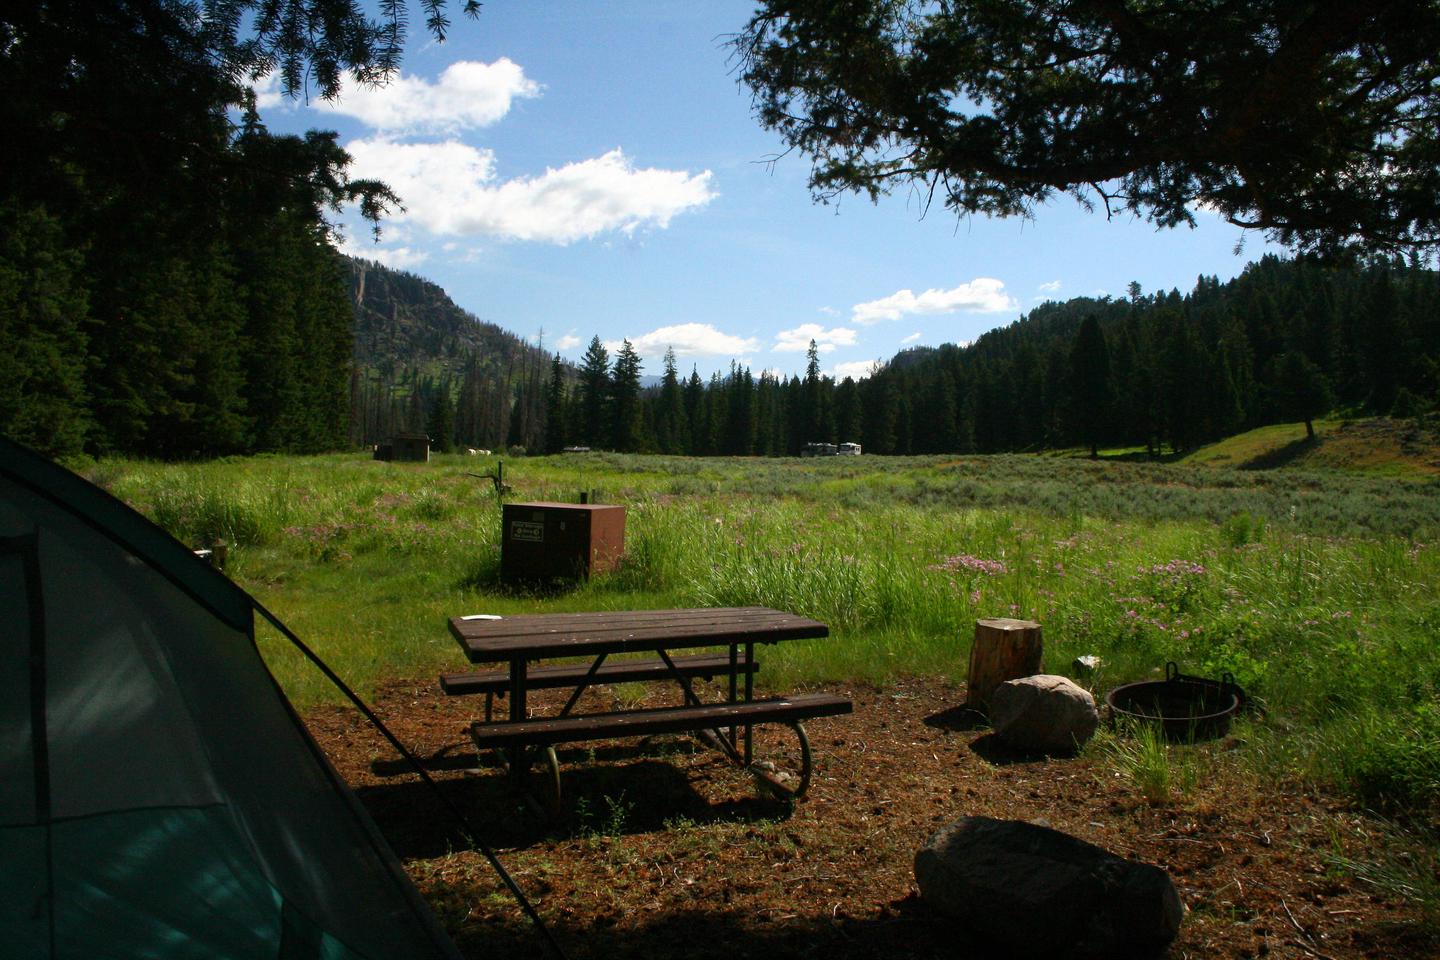 Slough Creek Campground site #8..Slough Creek Campground site #8